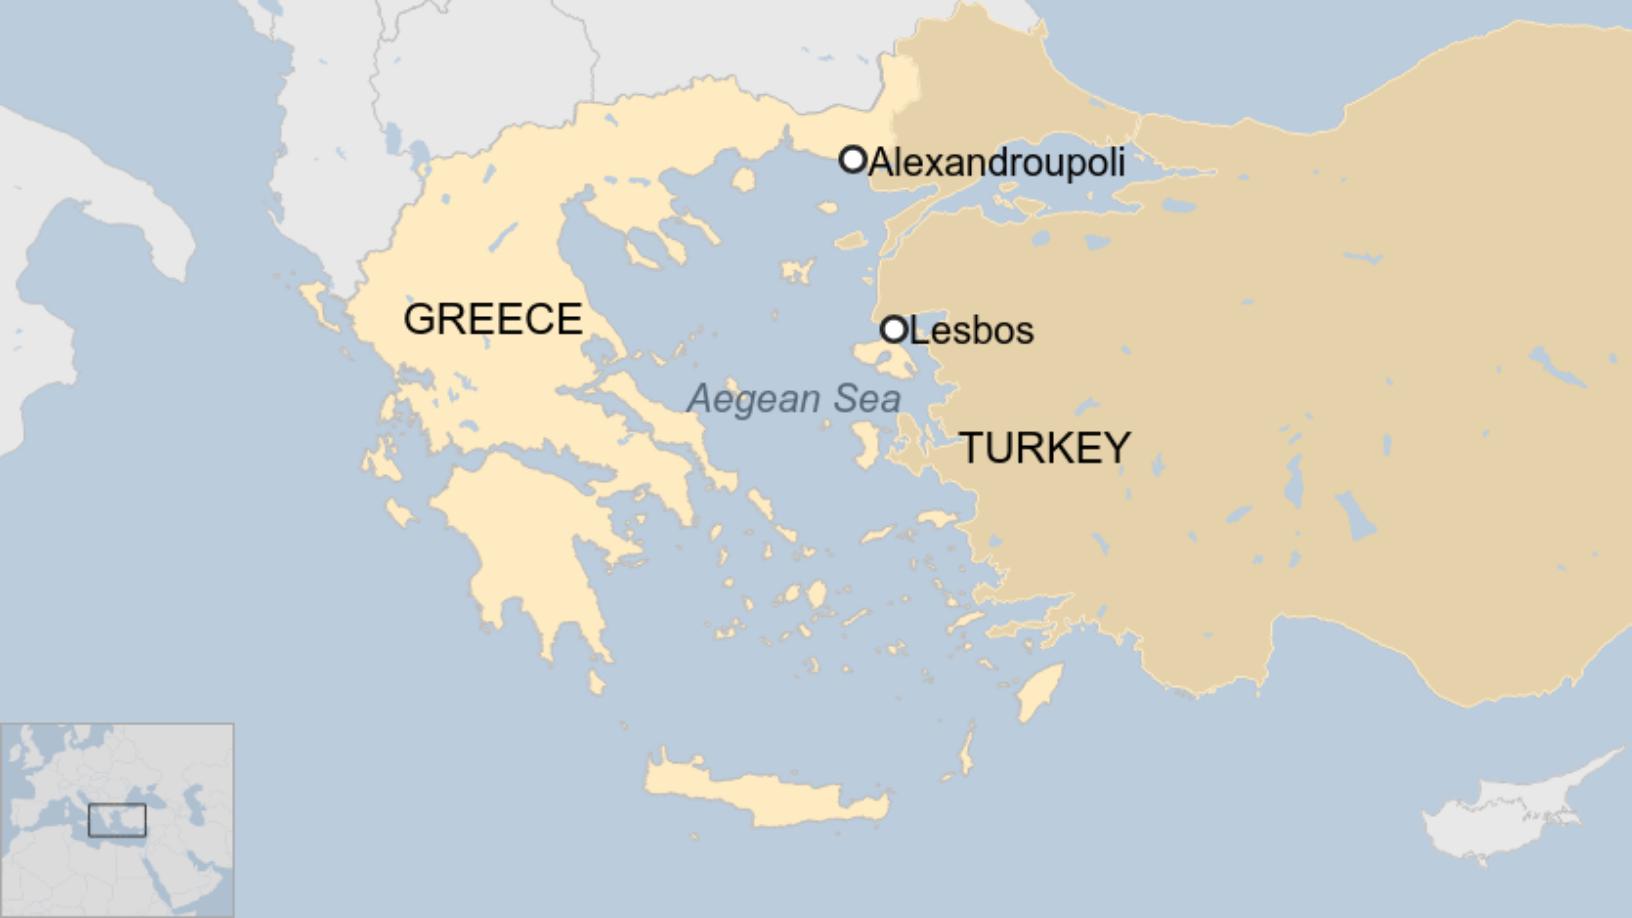 Map: Greece and Turkey with the Aegean in the middle. The land border is also visibile, with the city of Alexandroupoli highlighted